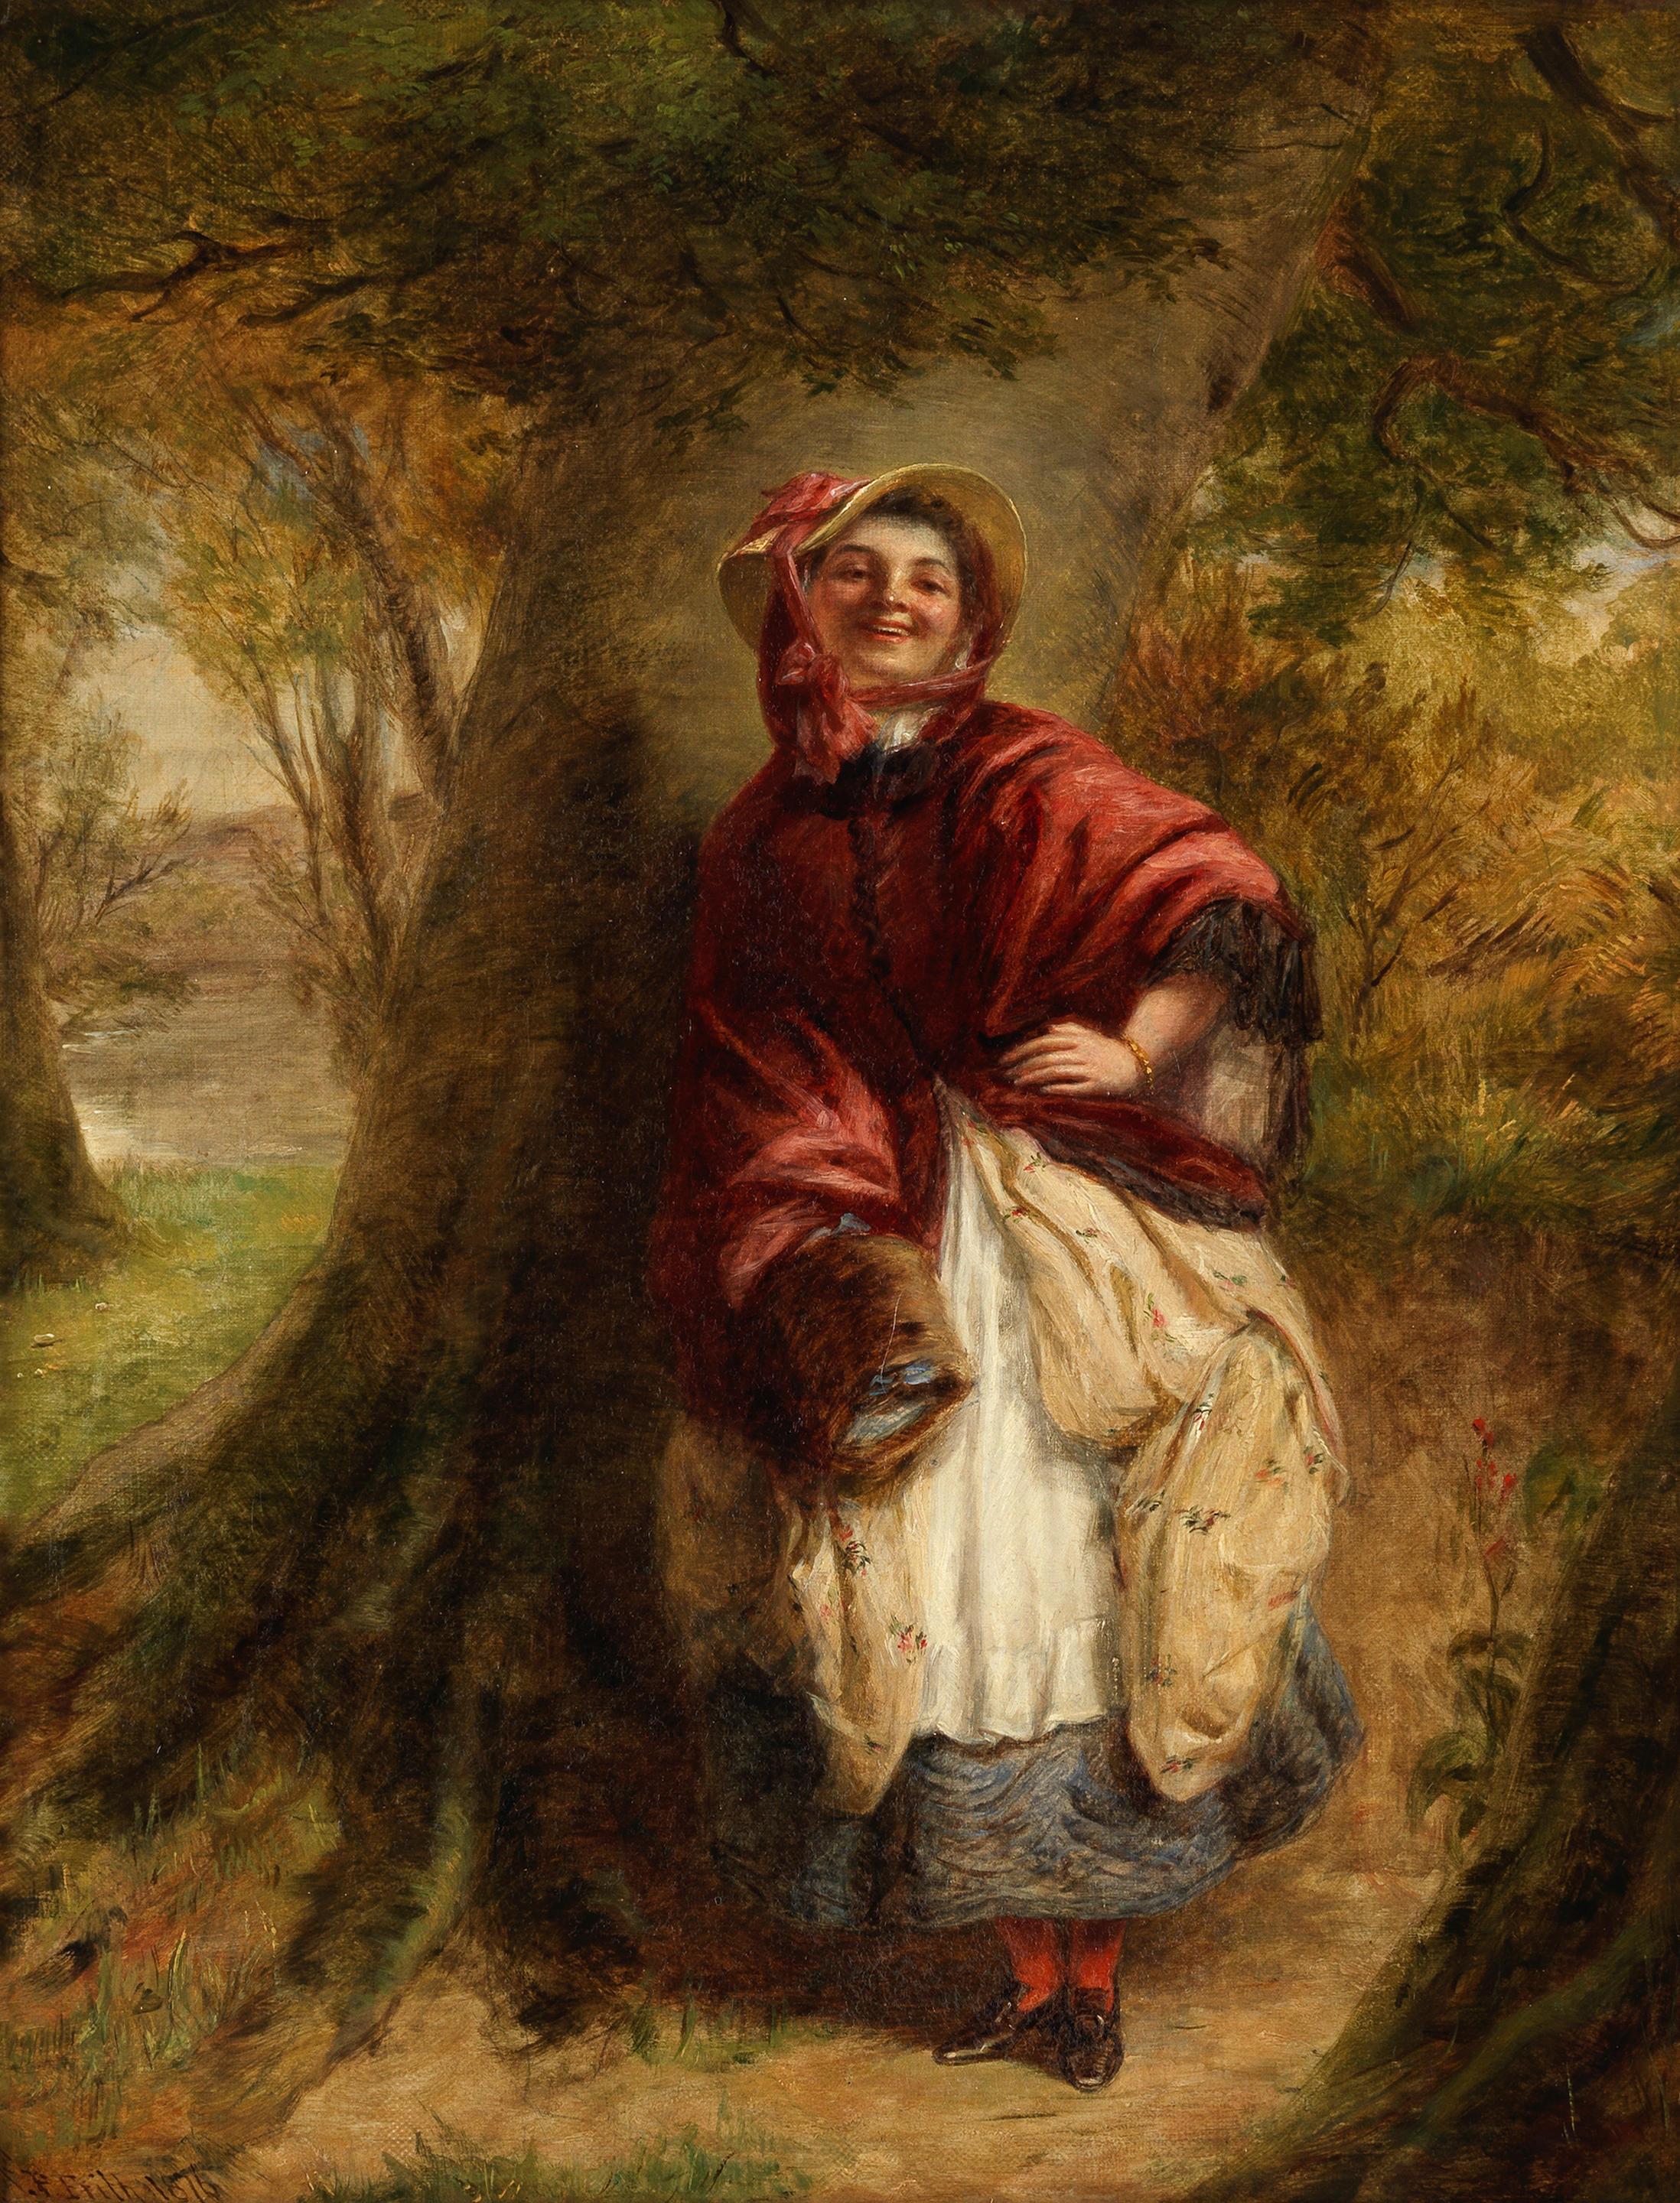 William Powell Frith RA  Figurative Painting - Dolly Varden, Victorian Figurative Signed Oil Painting, William Powell Frith RA